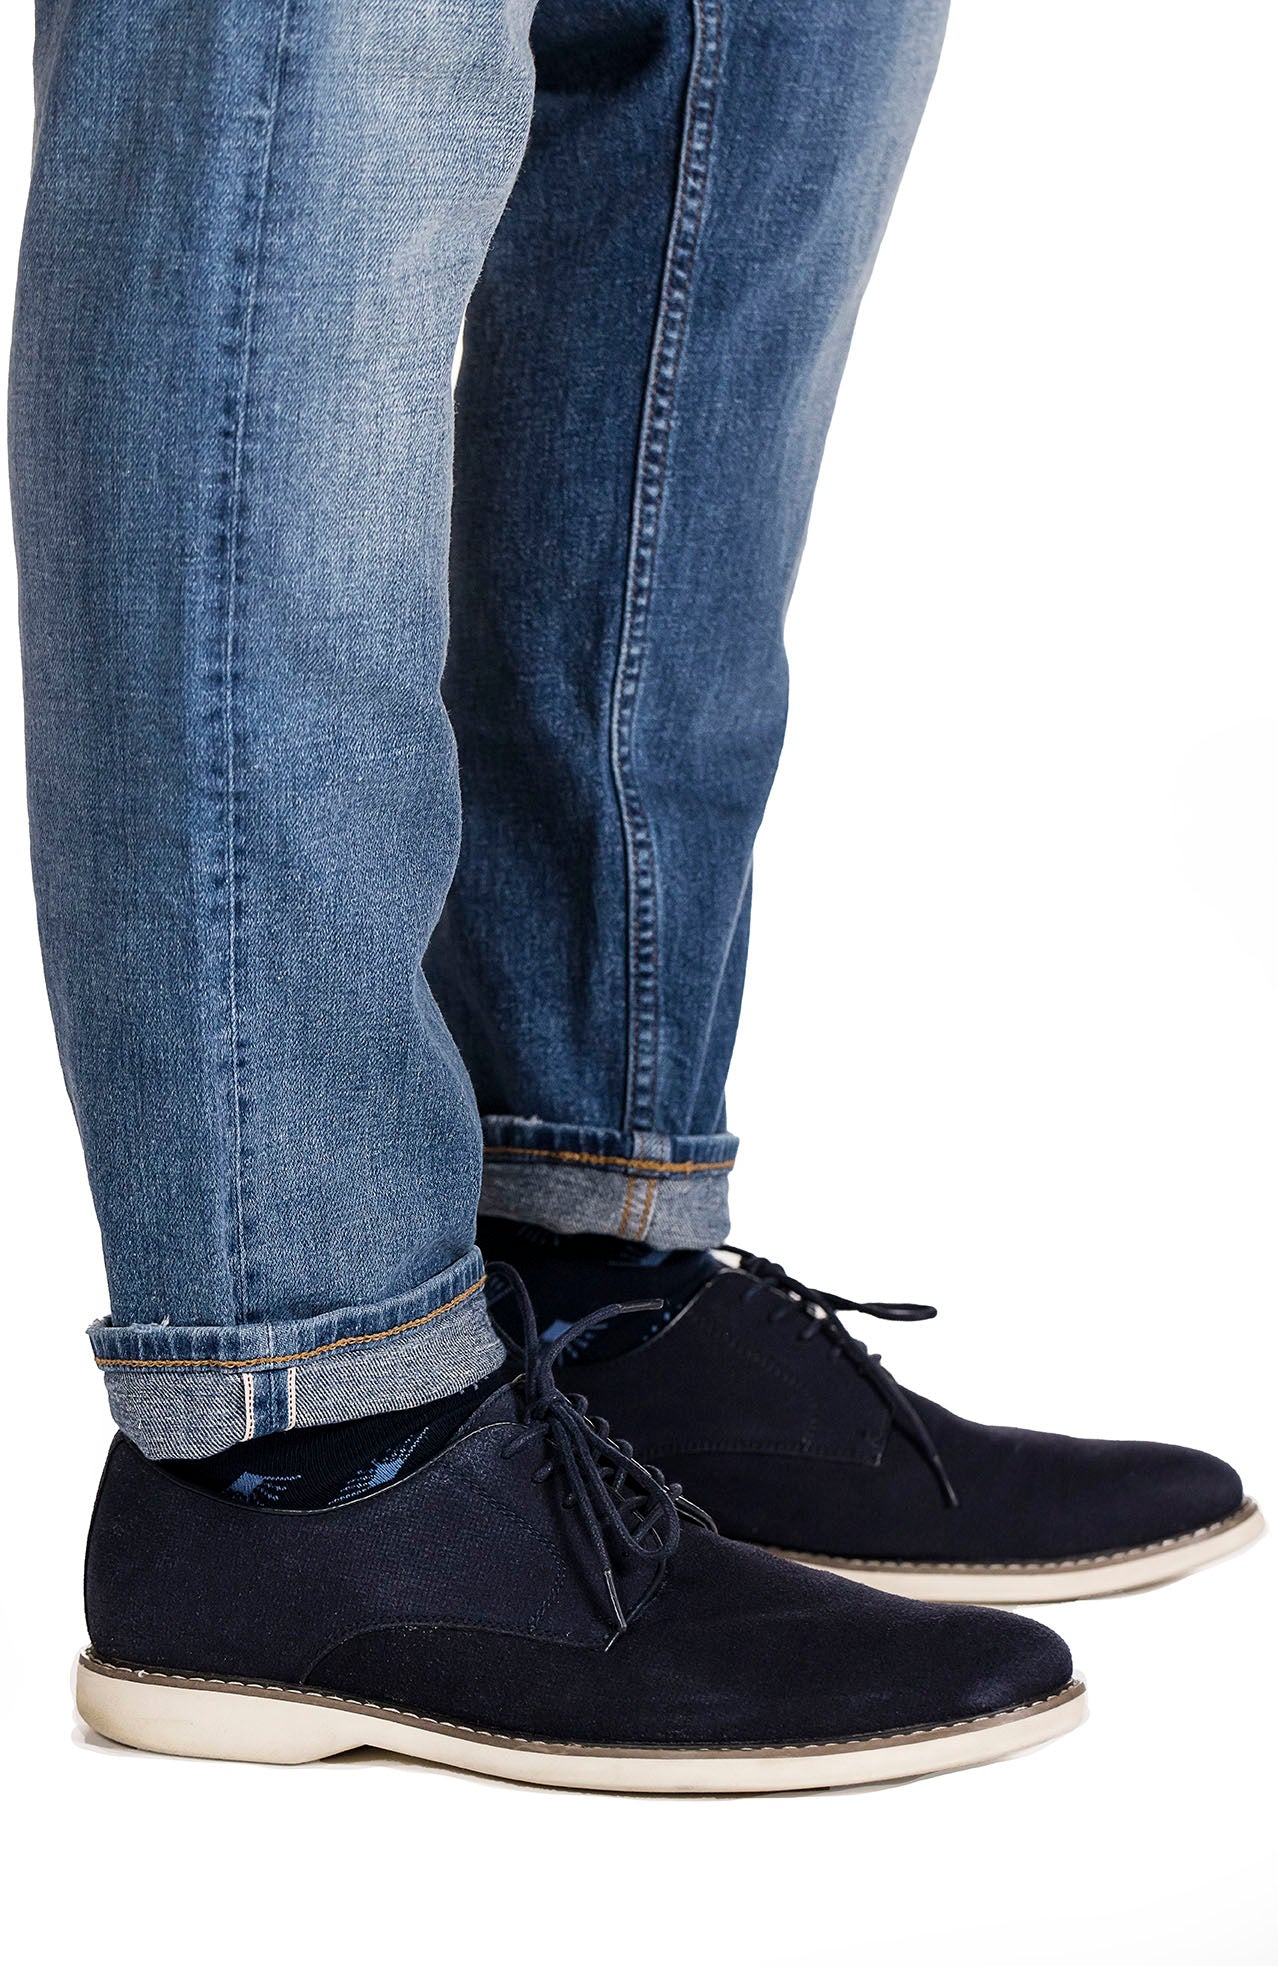 Selvage jeans – Revtown